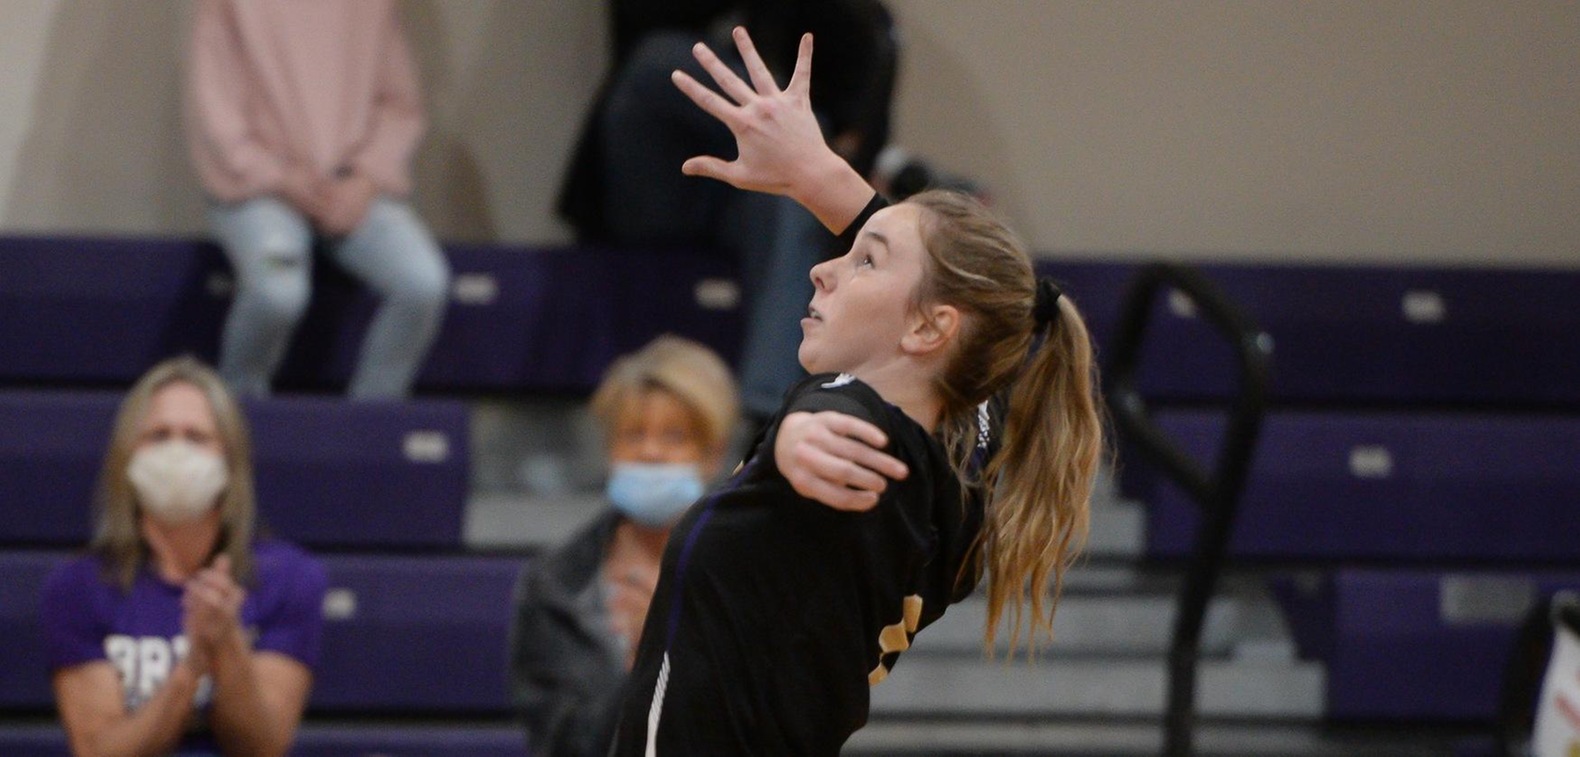 Sierra Athen totaled 13 kills to lead BU in a 3-0 sweep over Dakota State on Wednesday to clinch at least a share of the NSAA regular-season title.